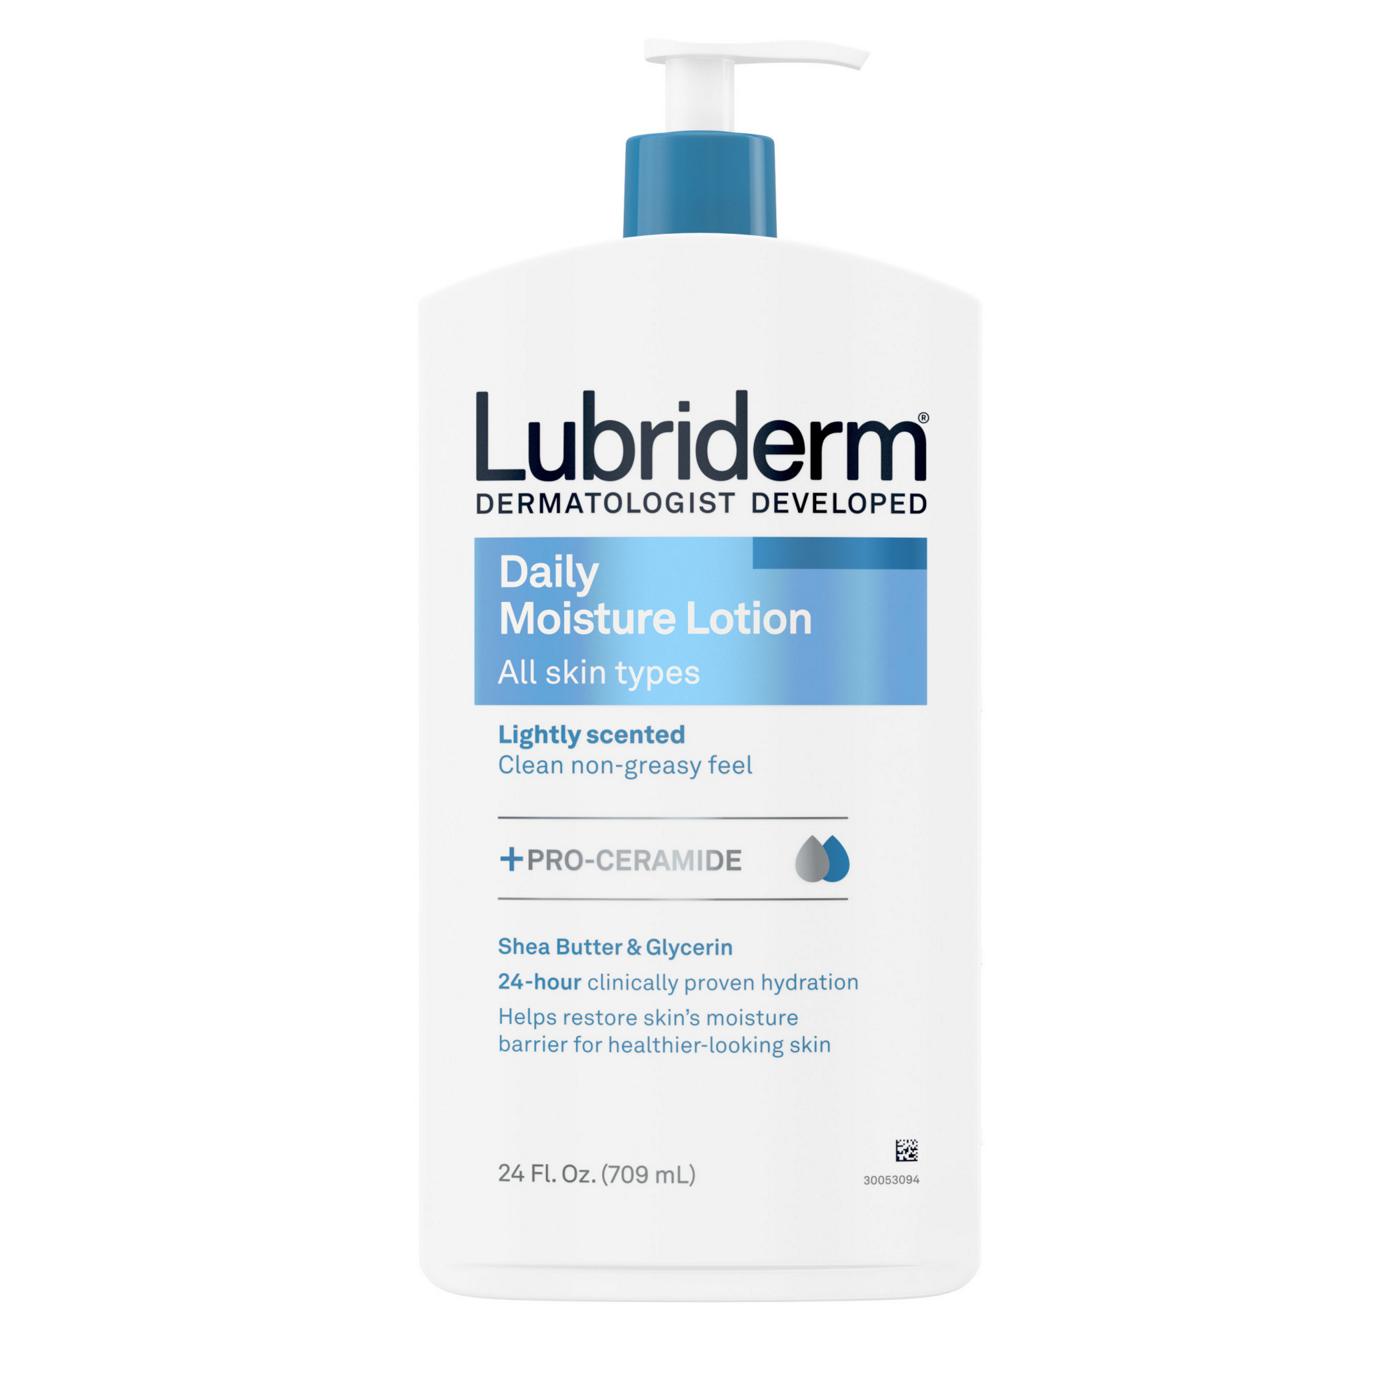 Lubriderm Daily Moisture Lotion; image 1 of 8